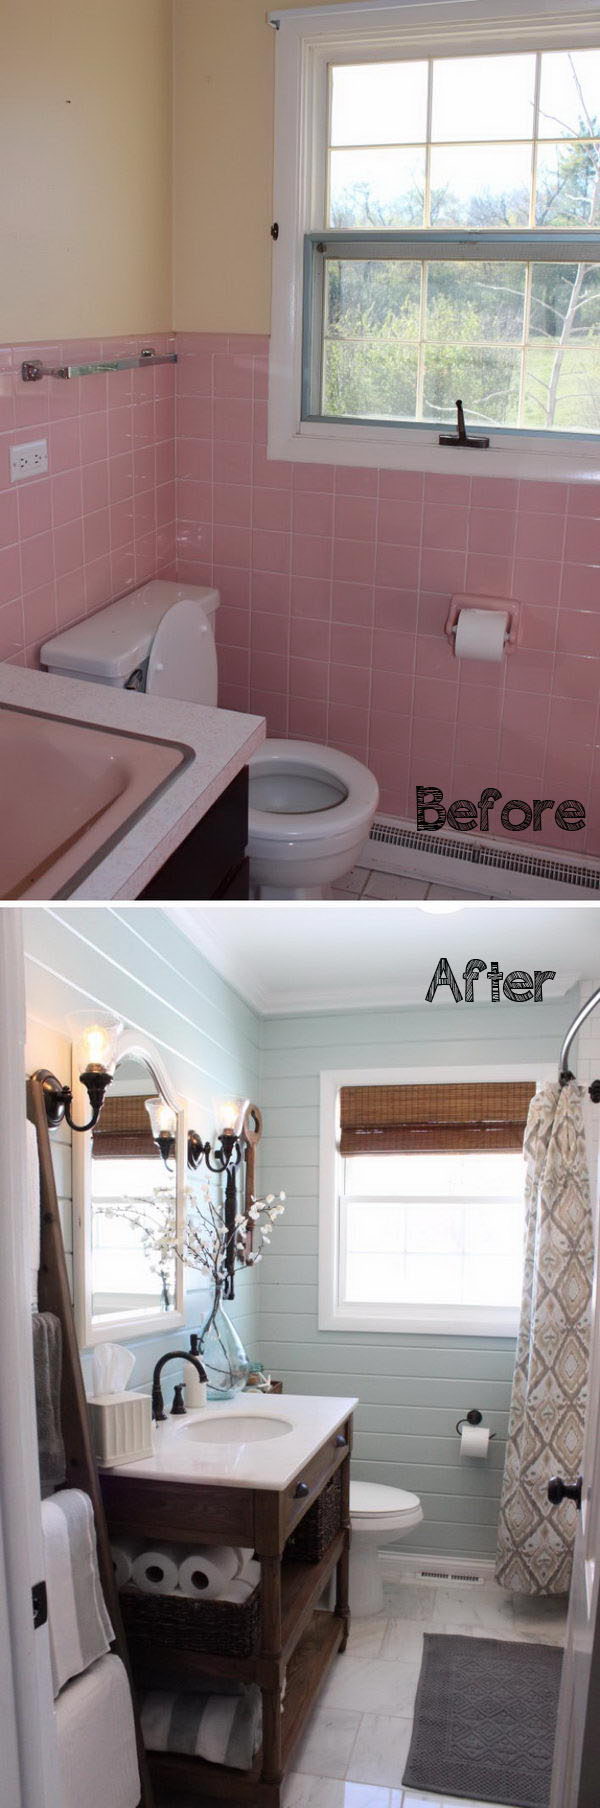 Blue Planked Walls with Crisp White Trim and Wood Details Bring in Farmhouse Style in This Bathroom Renovation . 